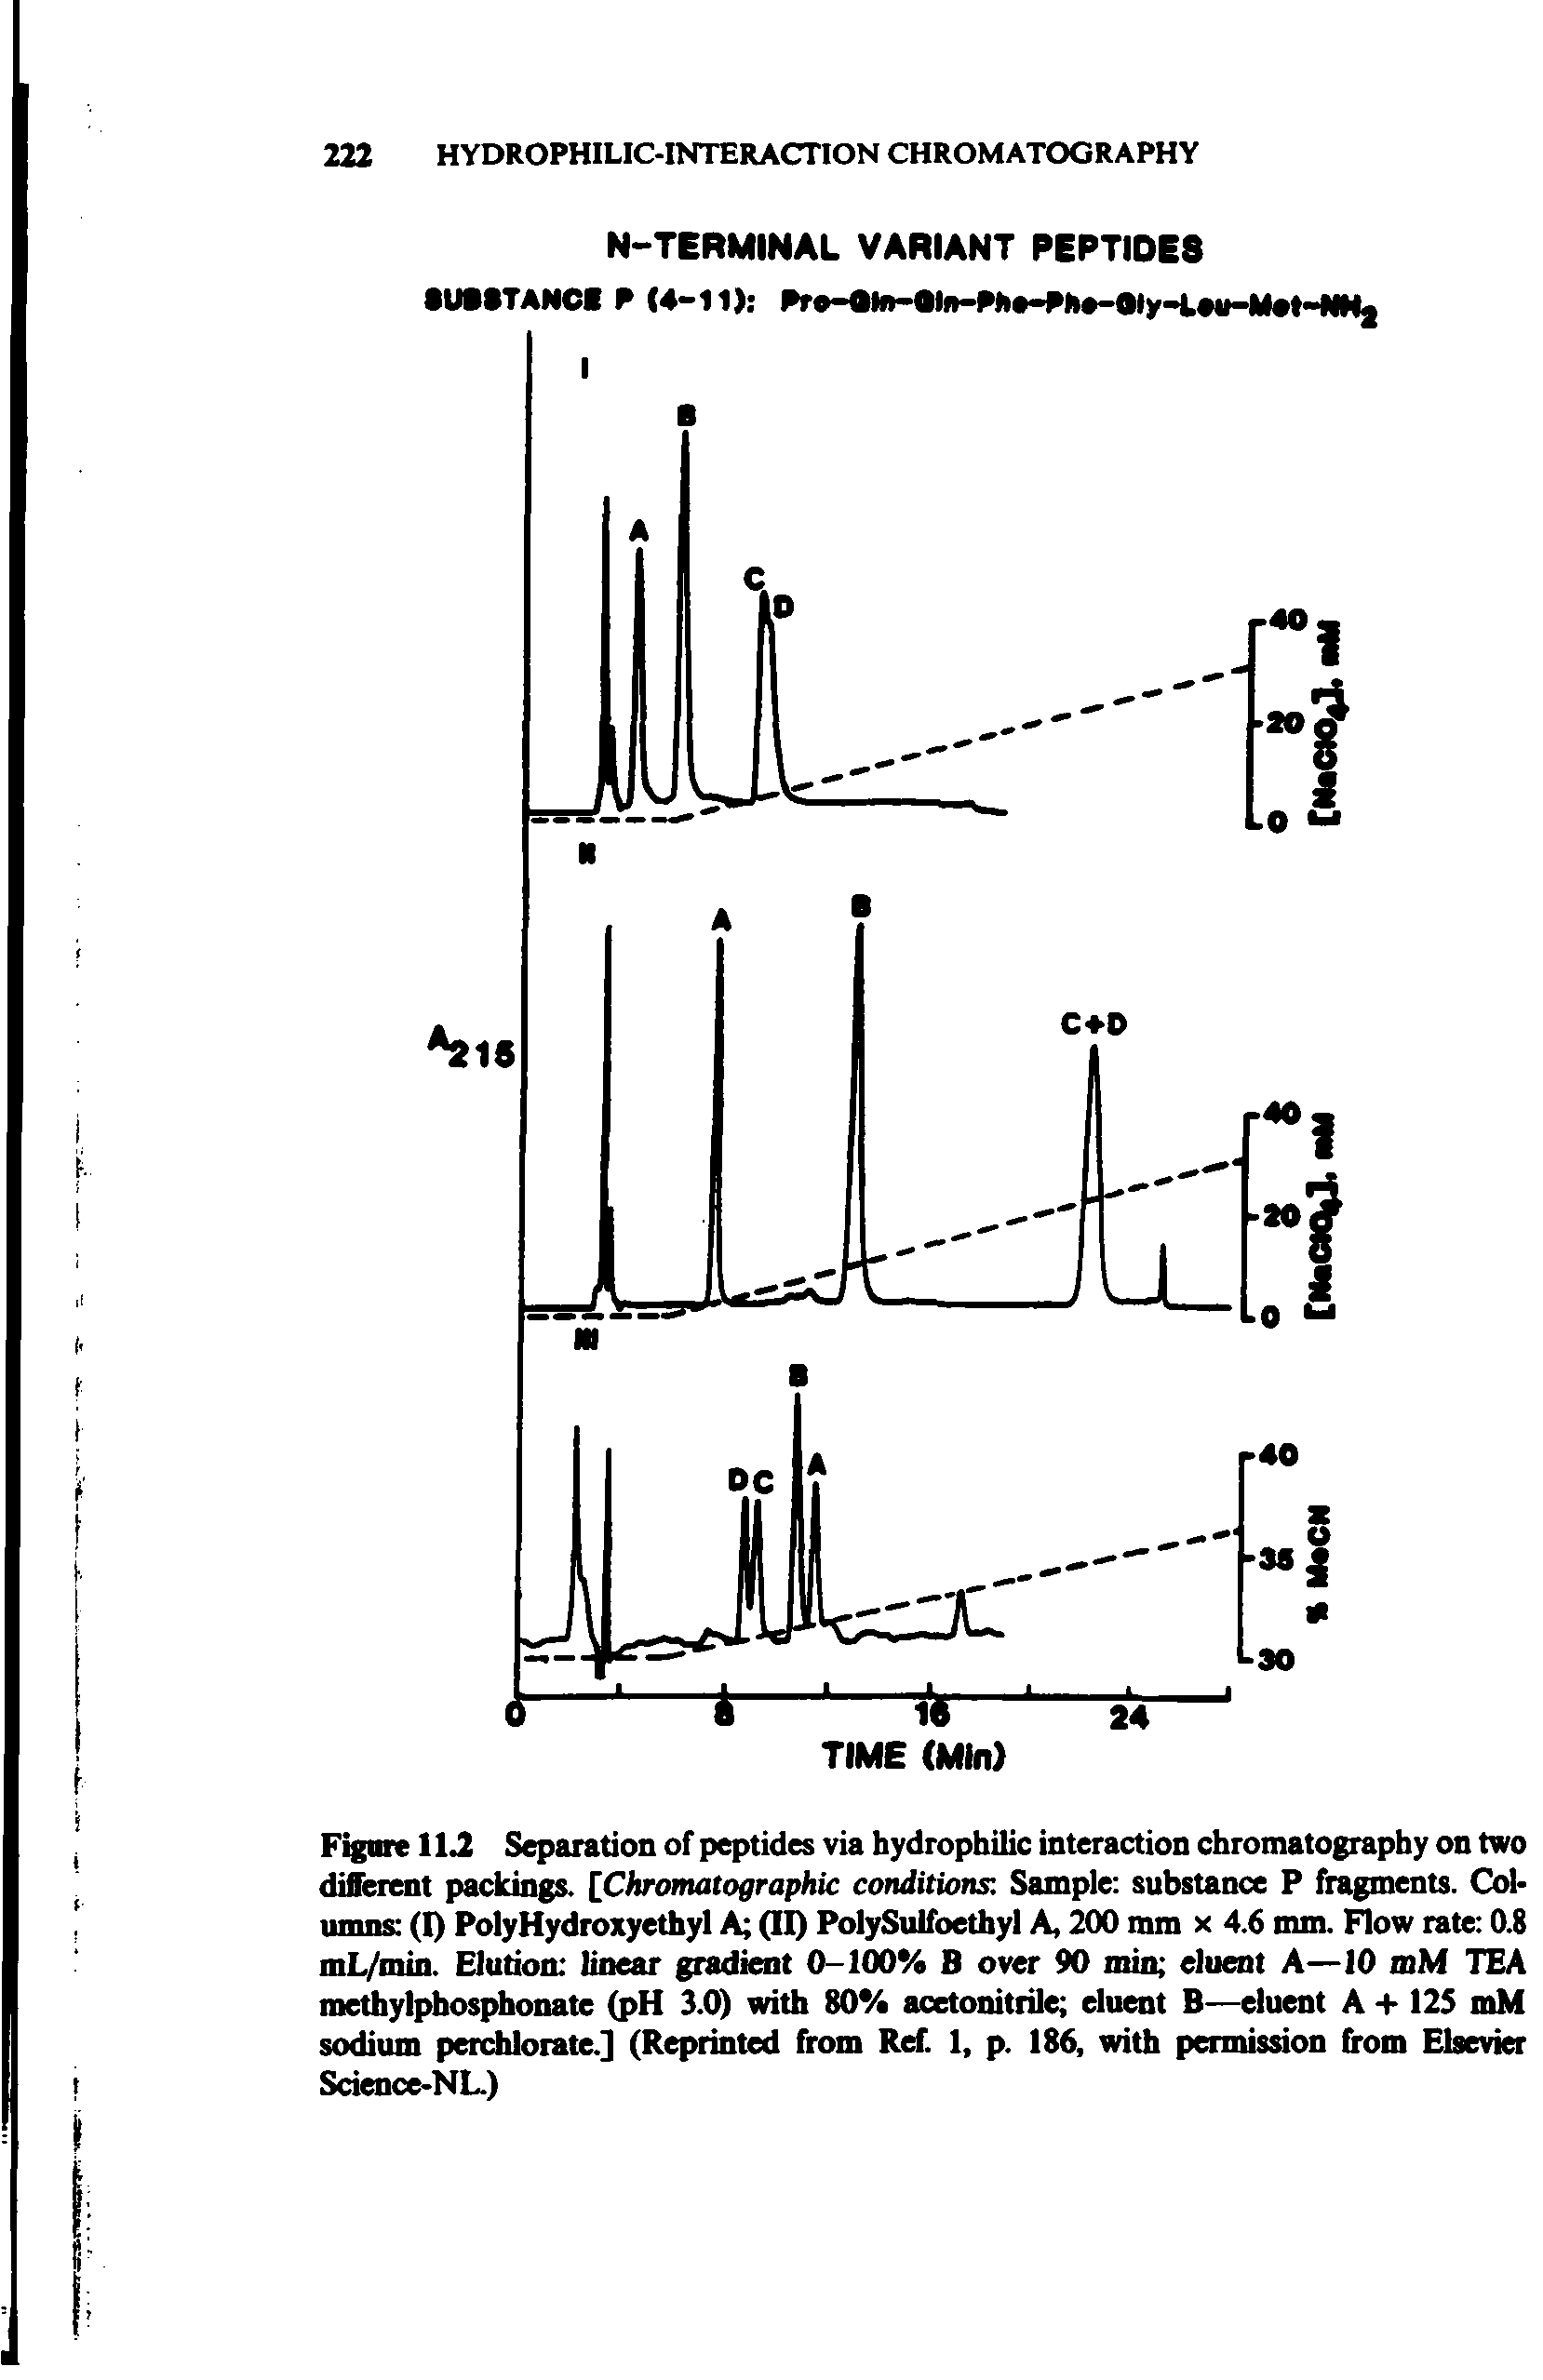 Figure 2 Separation of peptides via hydrophilic interaction chromatography on two different packings. IChromatographic conditions Sample substance P fragments. Off-umns (I) PolyHydroxyethyl A (II) PolySulfoethyl A, 200 mm x 4.6 mm. Flow rate 0.8 mL/min. Elution linear gradient 0-100% B over 90 min eluent A—10 mM TEA methylphosphonate (pH 3.0) with 80% acetonitrile eluent B—eluent A -I-125 mM sodium perchlorate.] (Reprinted from Ref. 1, p. 186, with permission from Ebevier Science>NL)...